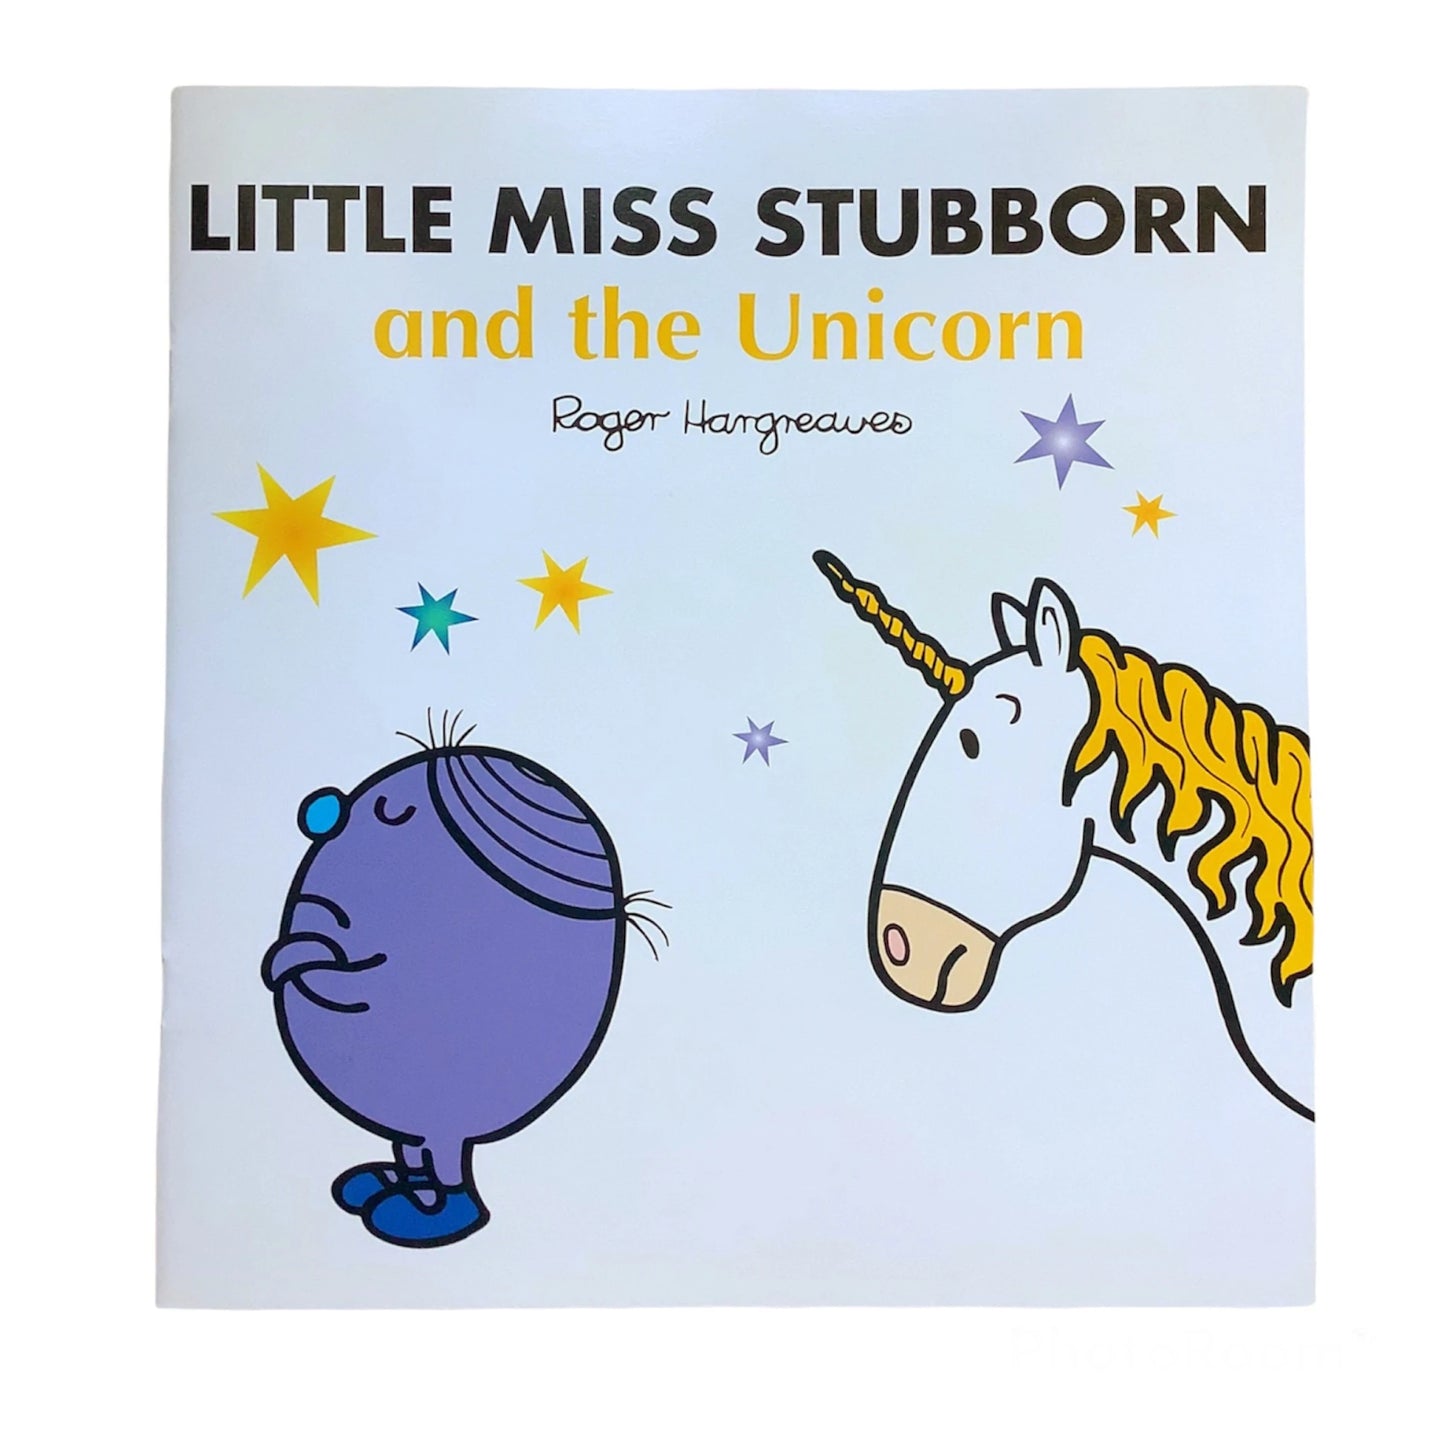 Little Miss Stubborn and the Unicorn by Roger Hargreaves (Mr. Men)